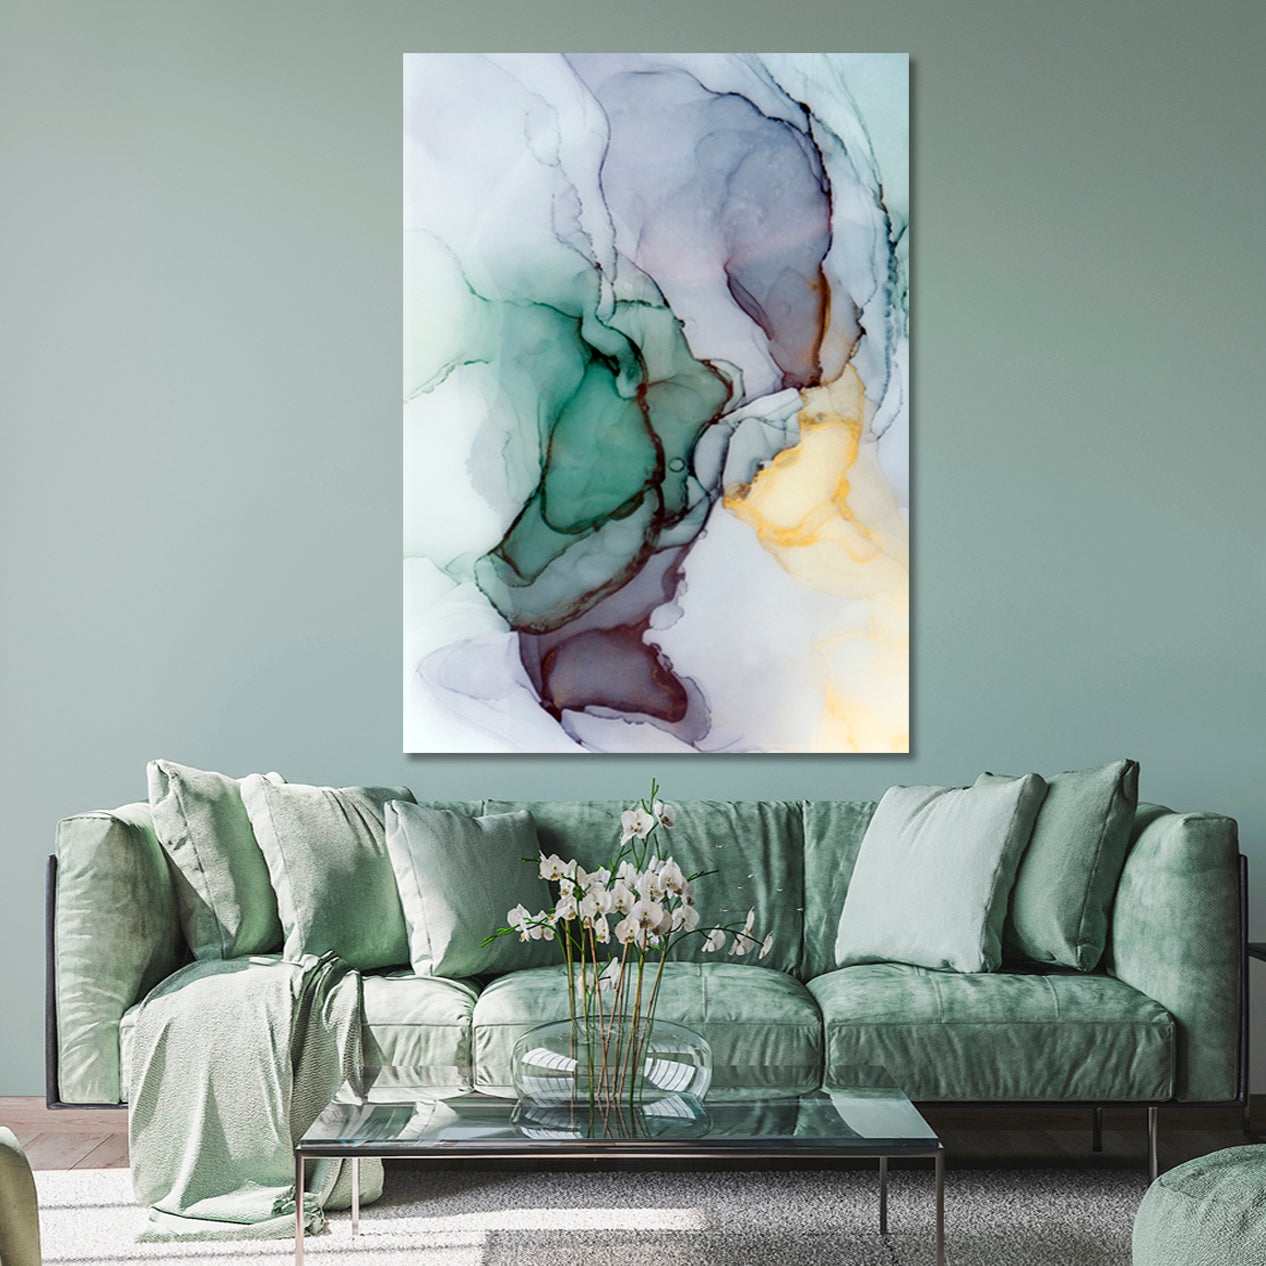 Abstract Veins Alcohol Ink Paint Translucent Free-flowing Fluid Art, Oriental Marbling Canvas Print Artesty 1 Panel 16"x24" 